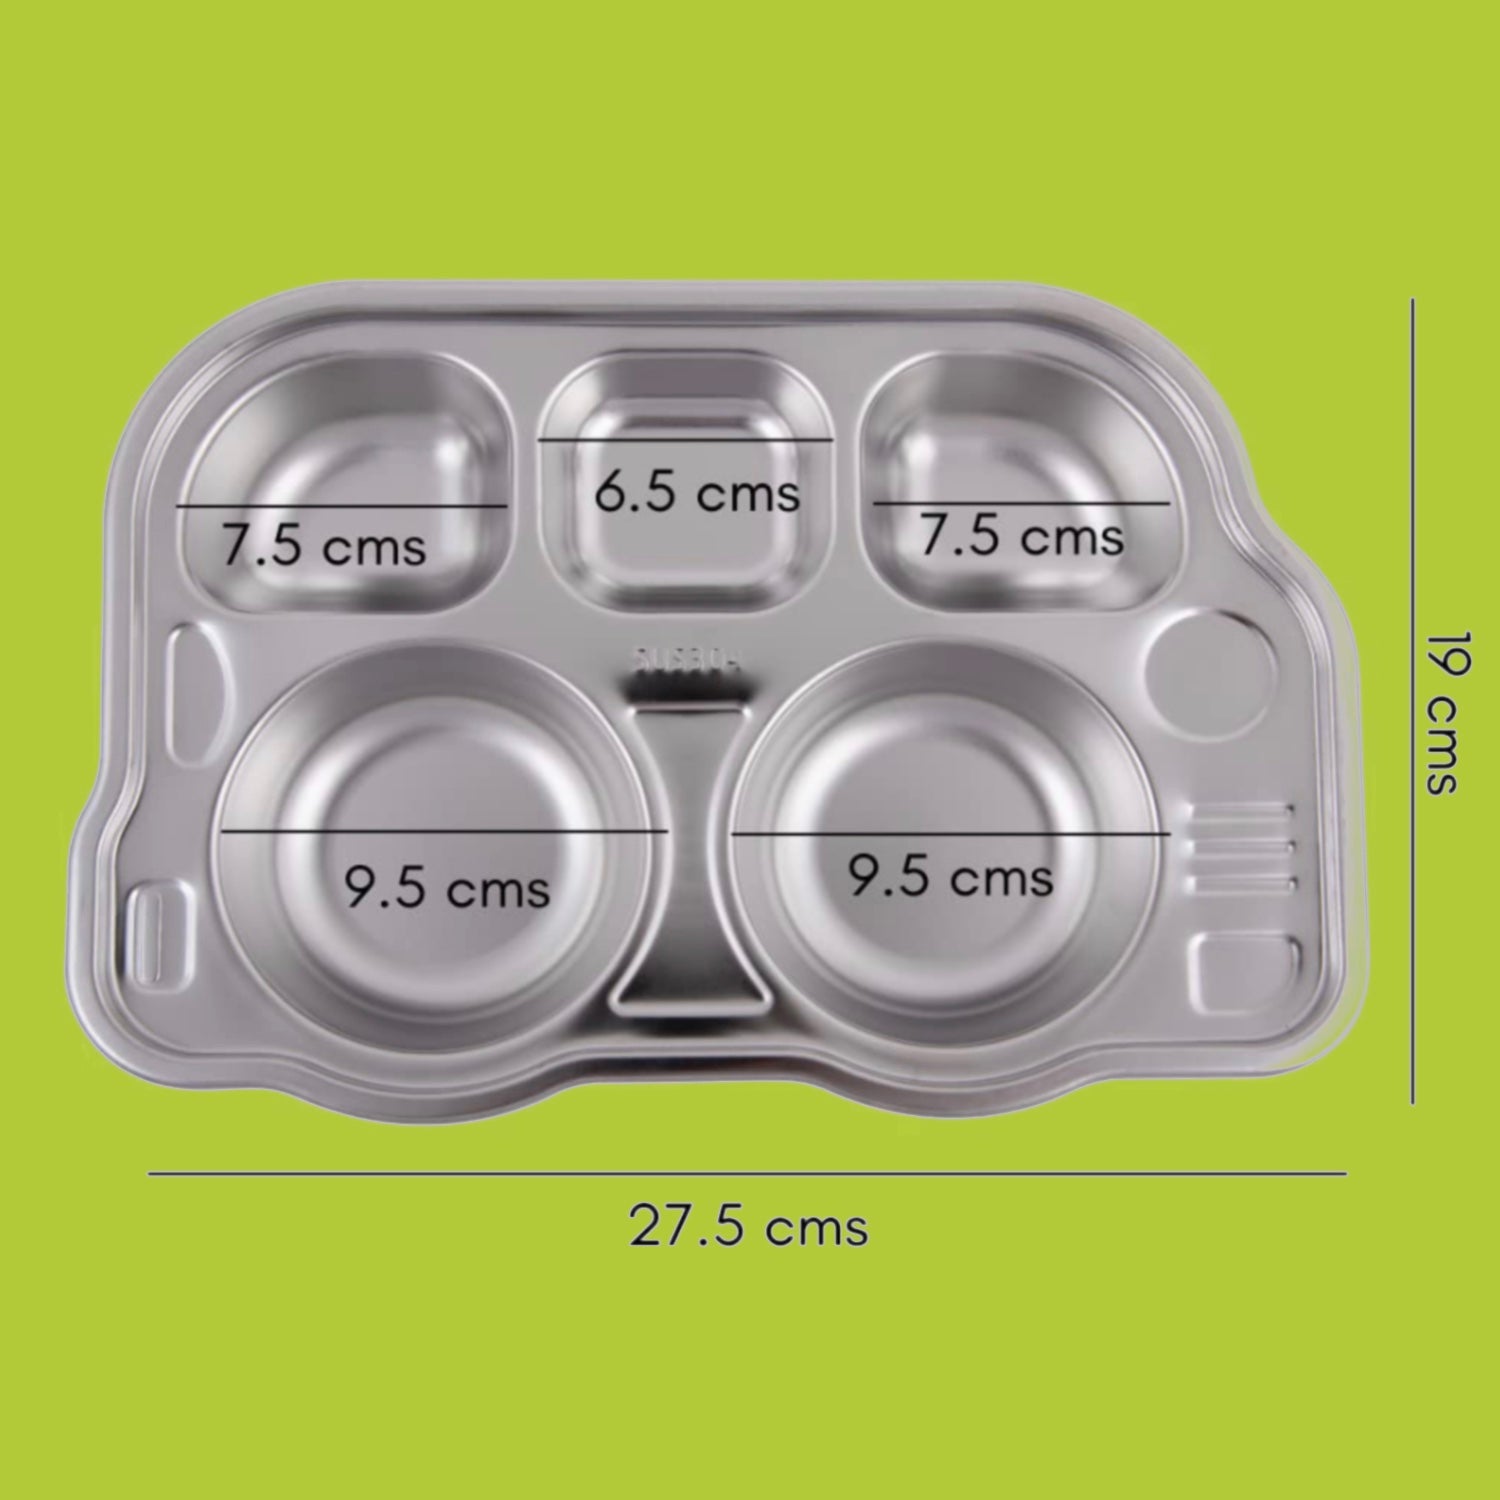 Theoni Stainless Steel Divided Meal  Plate Tray - 5Compartments Dinner Dish for Baby- Toddler- Kids Feeding set - bus  Shape- BPA-Free Safe Fun Non-Toxic Heavy Duty .